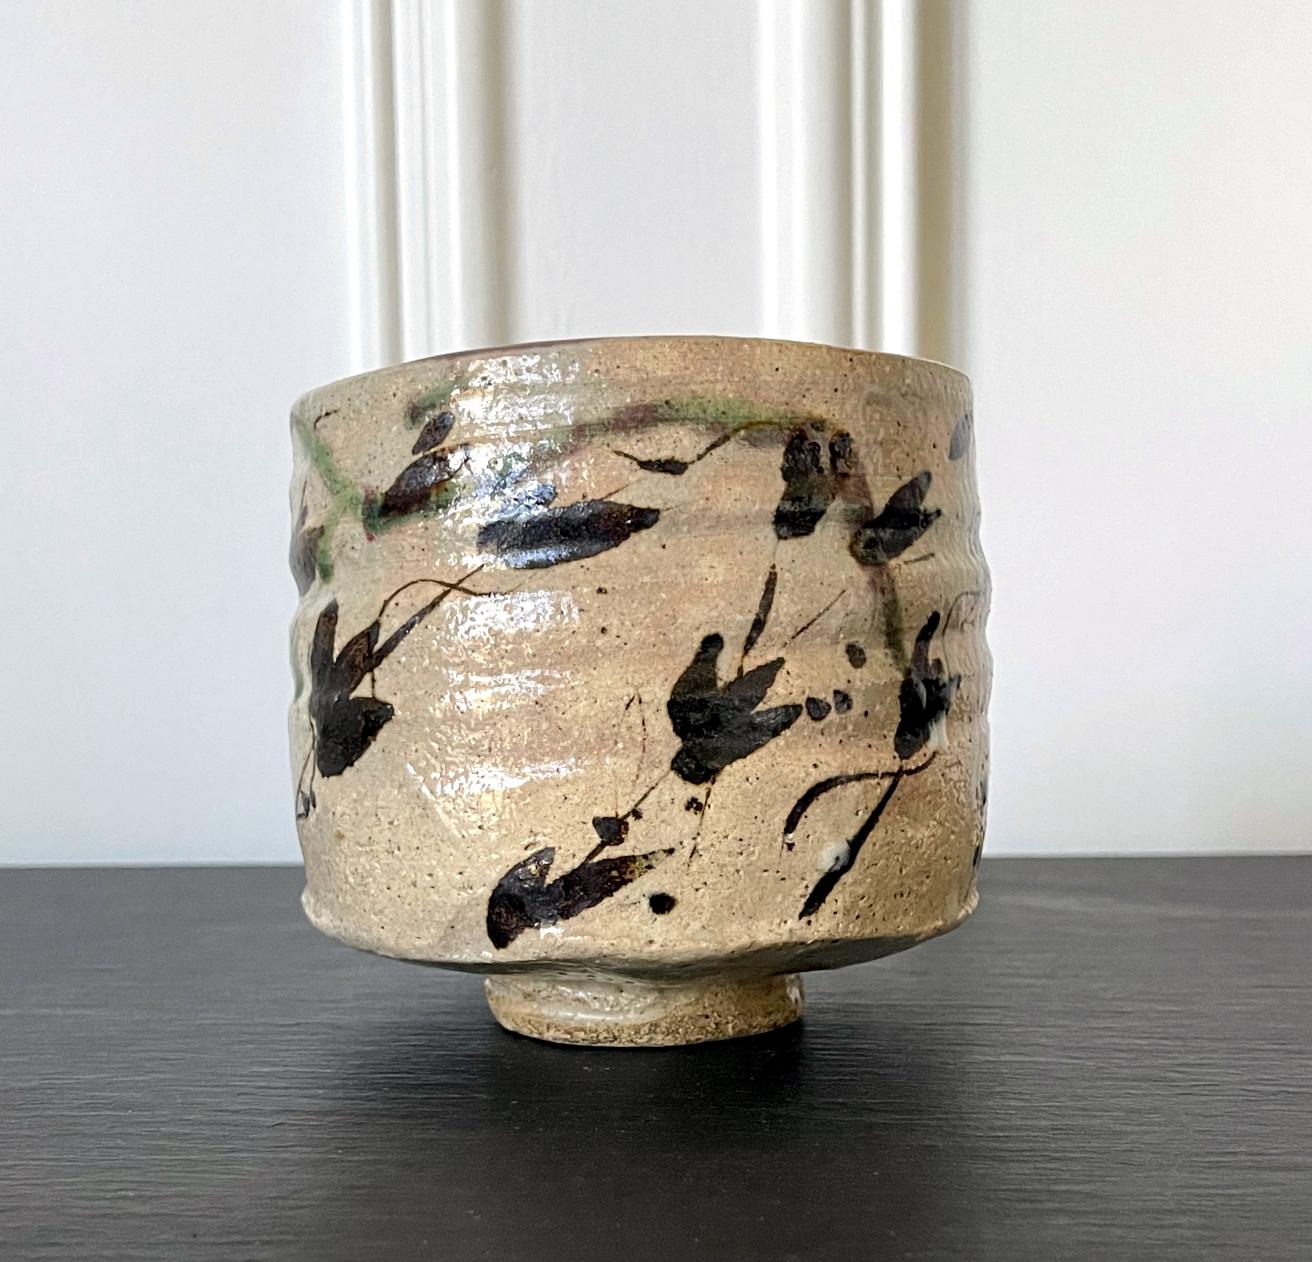 A Japanese Kutsu-gata (clog-shaped) chawan (tea bowl) circa 19th century possibly older. The stoneware bowl potted from buff clay has a slight irregular shape and an unusual depth for a tea bowl. Of Mino ware Oribe type, the chawan was entirely